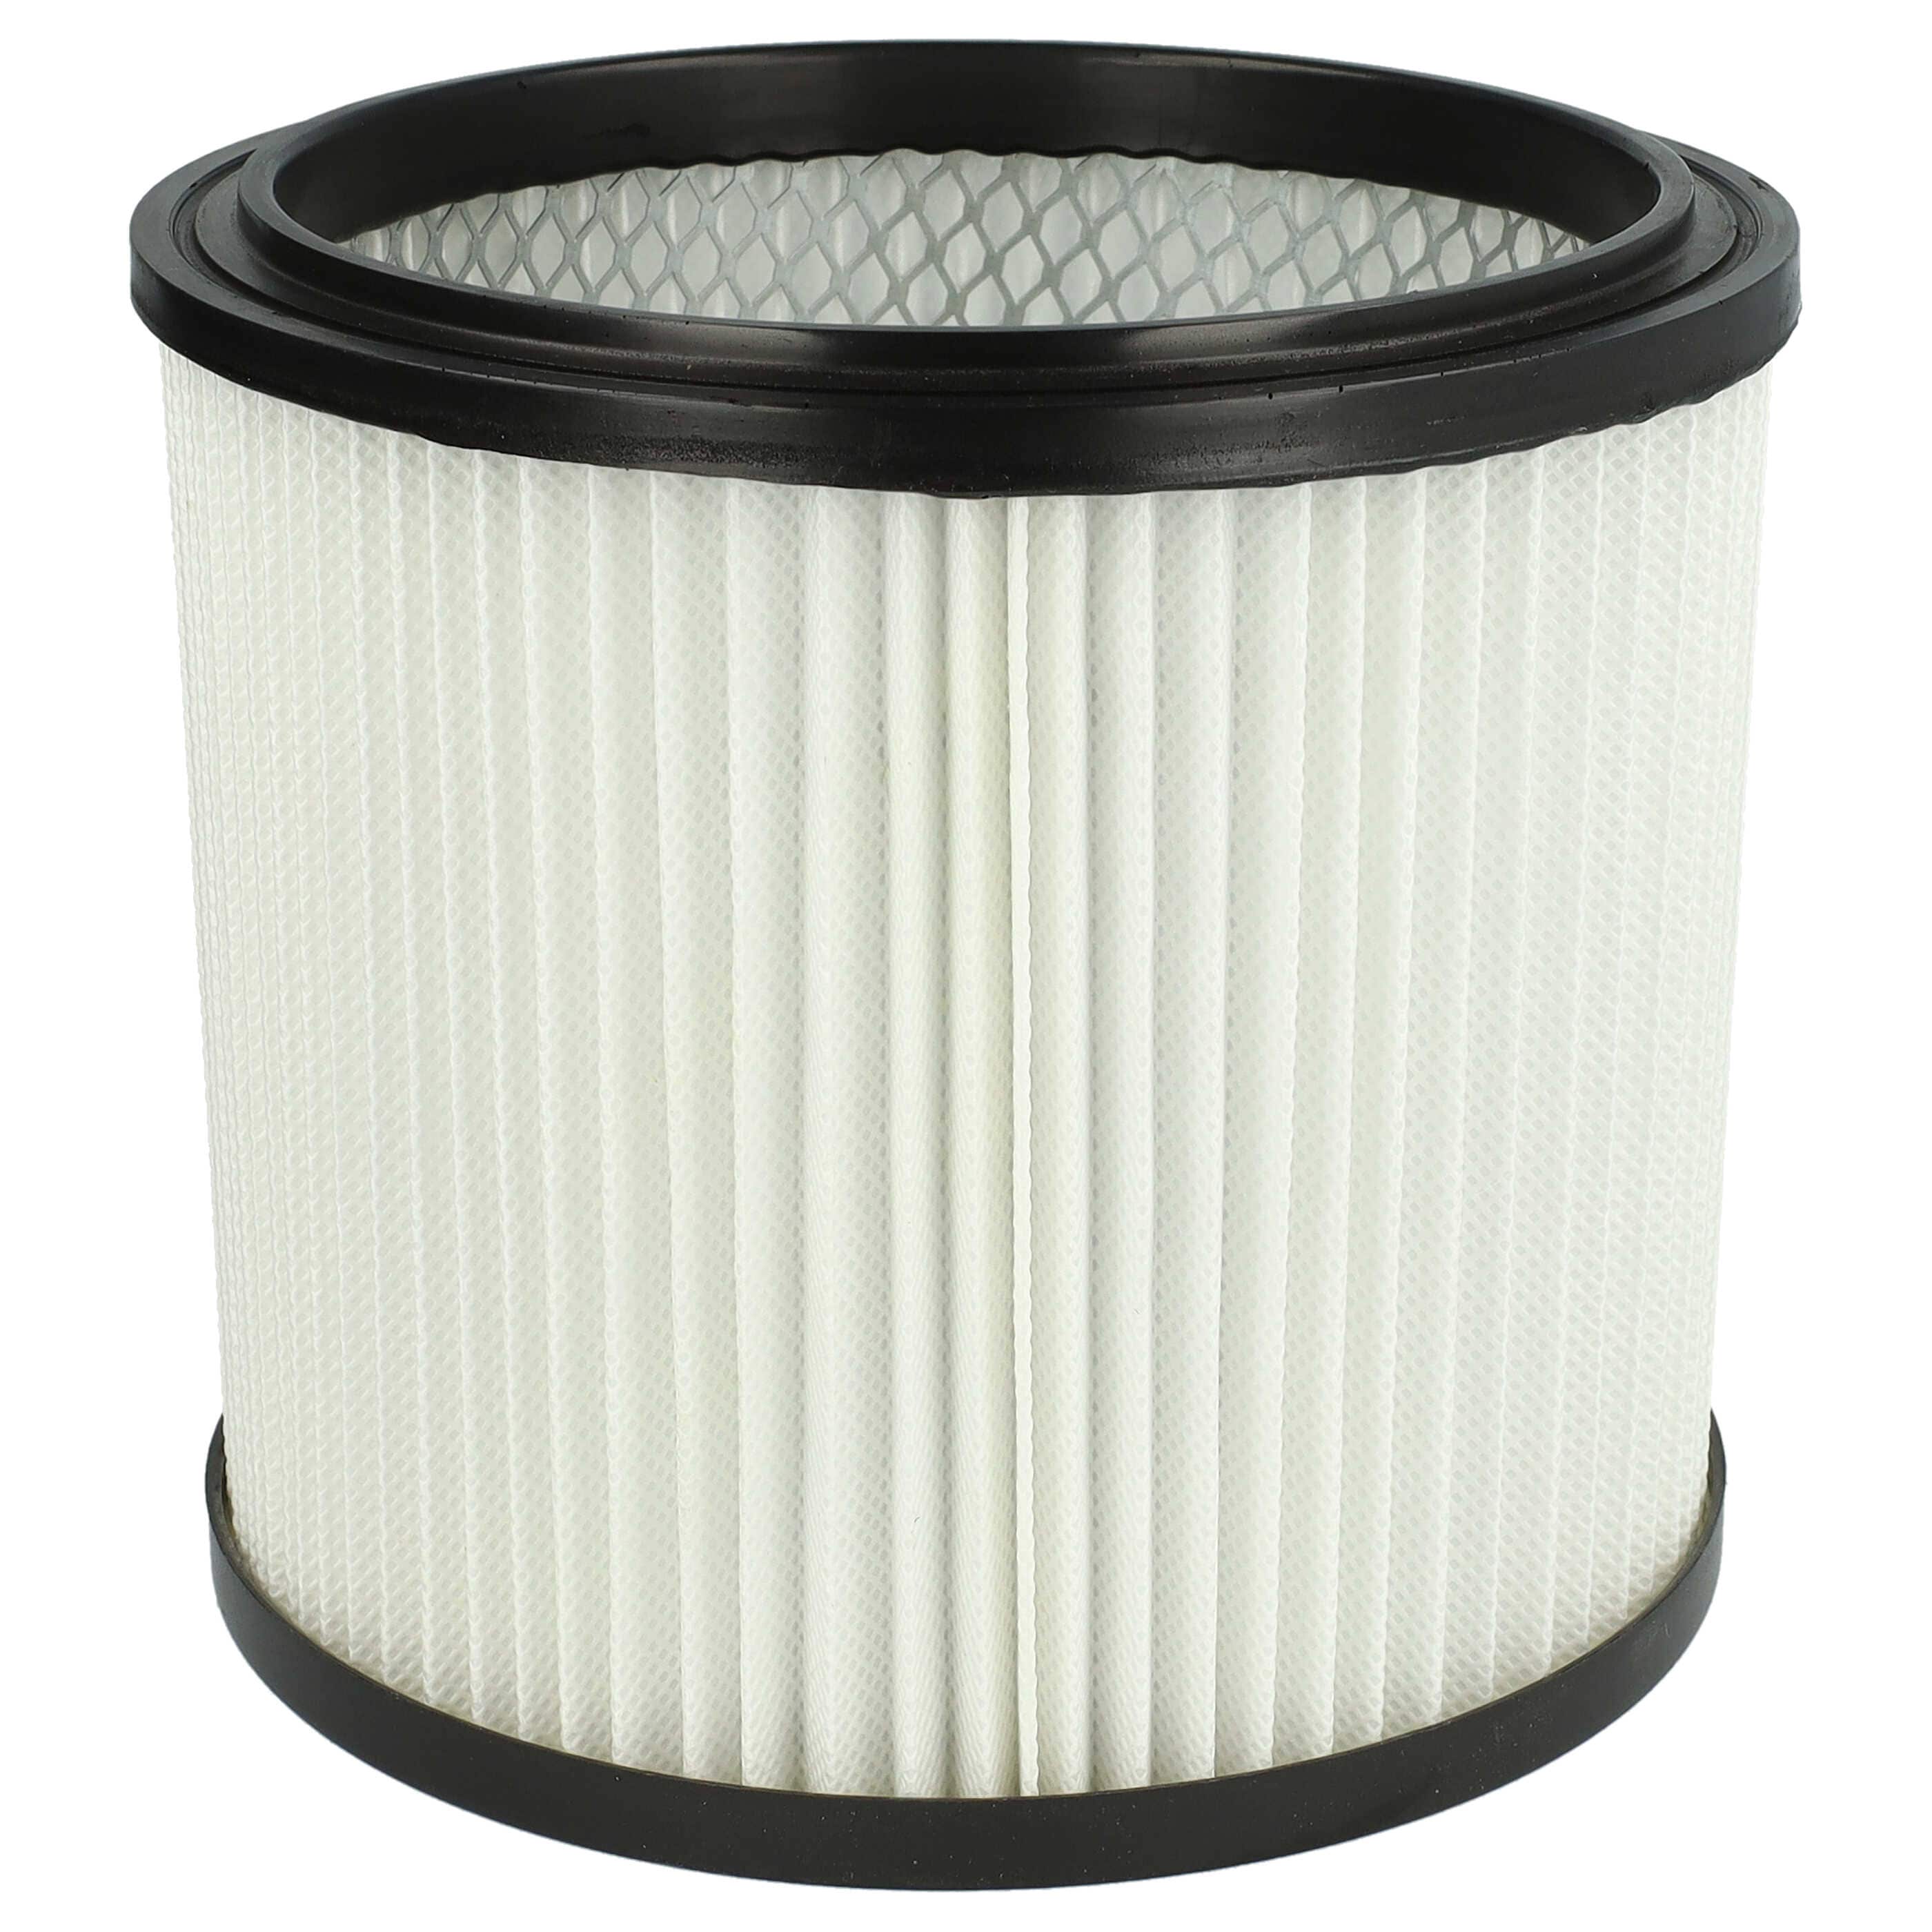 1x cartridge filter replaces Einhell 2351110 for LIV Vacuum Cleaner, black / white